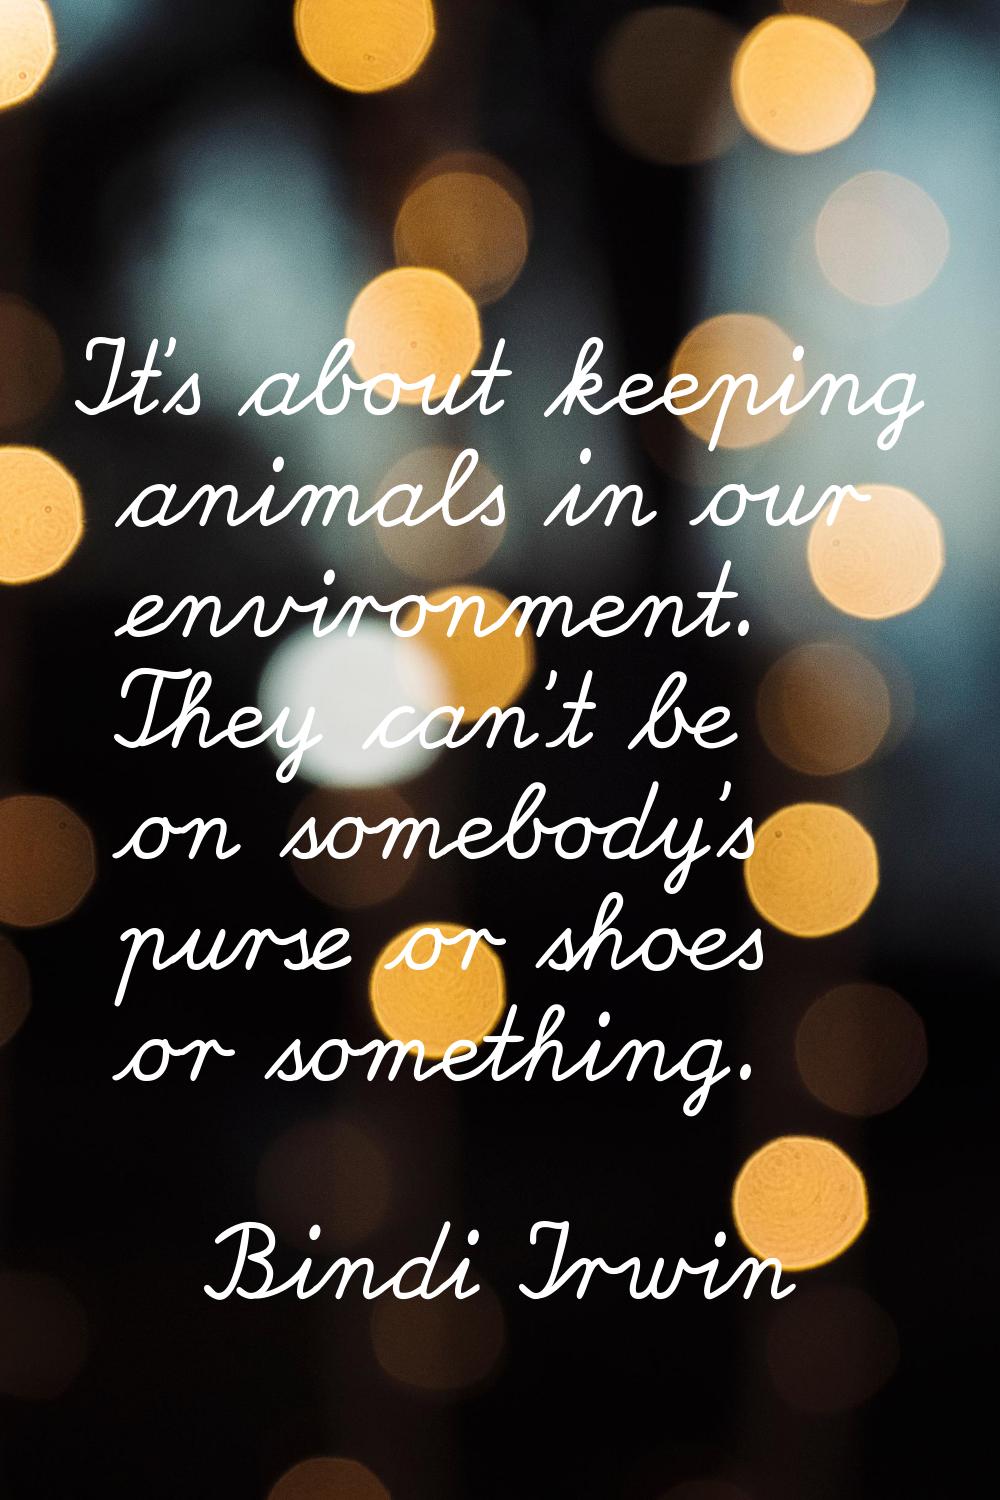 It's about keeping animals in our environment. They can't be on somebody's purse or shoes or someth